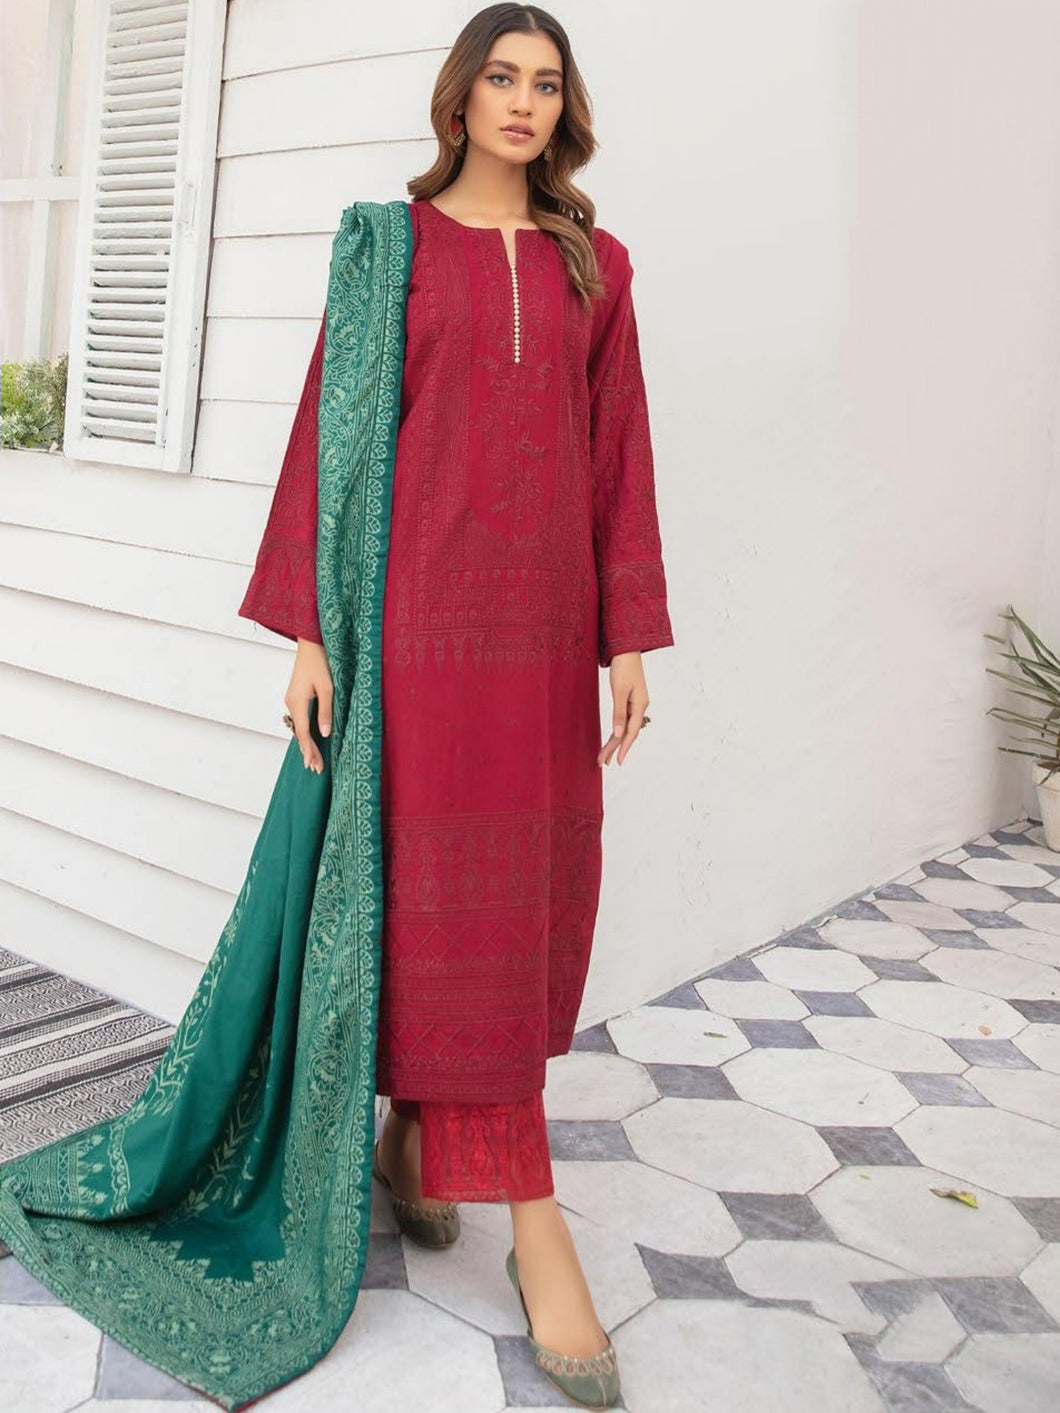 Johra Nafees Embroidered Marina Peach Winter Collection JR 632